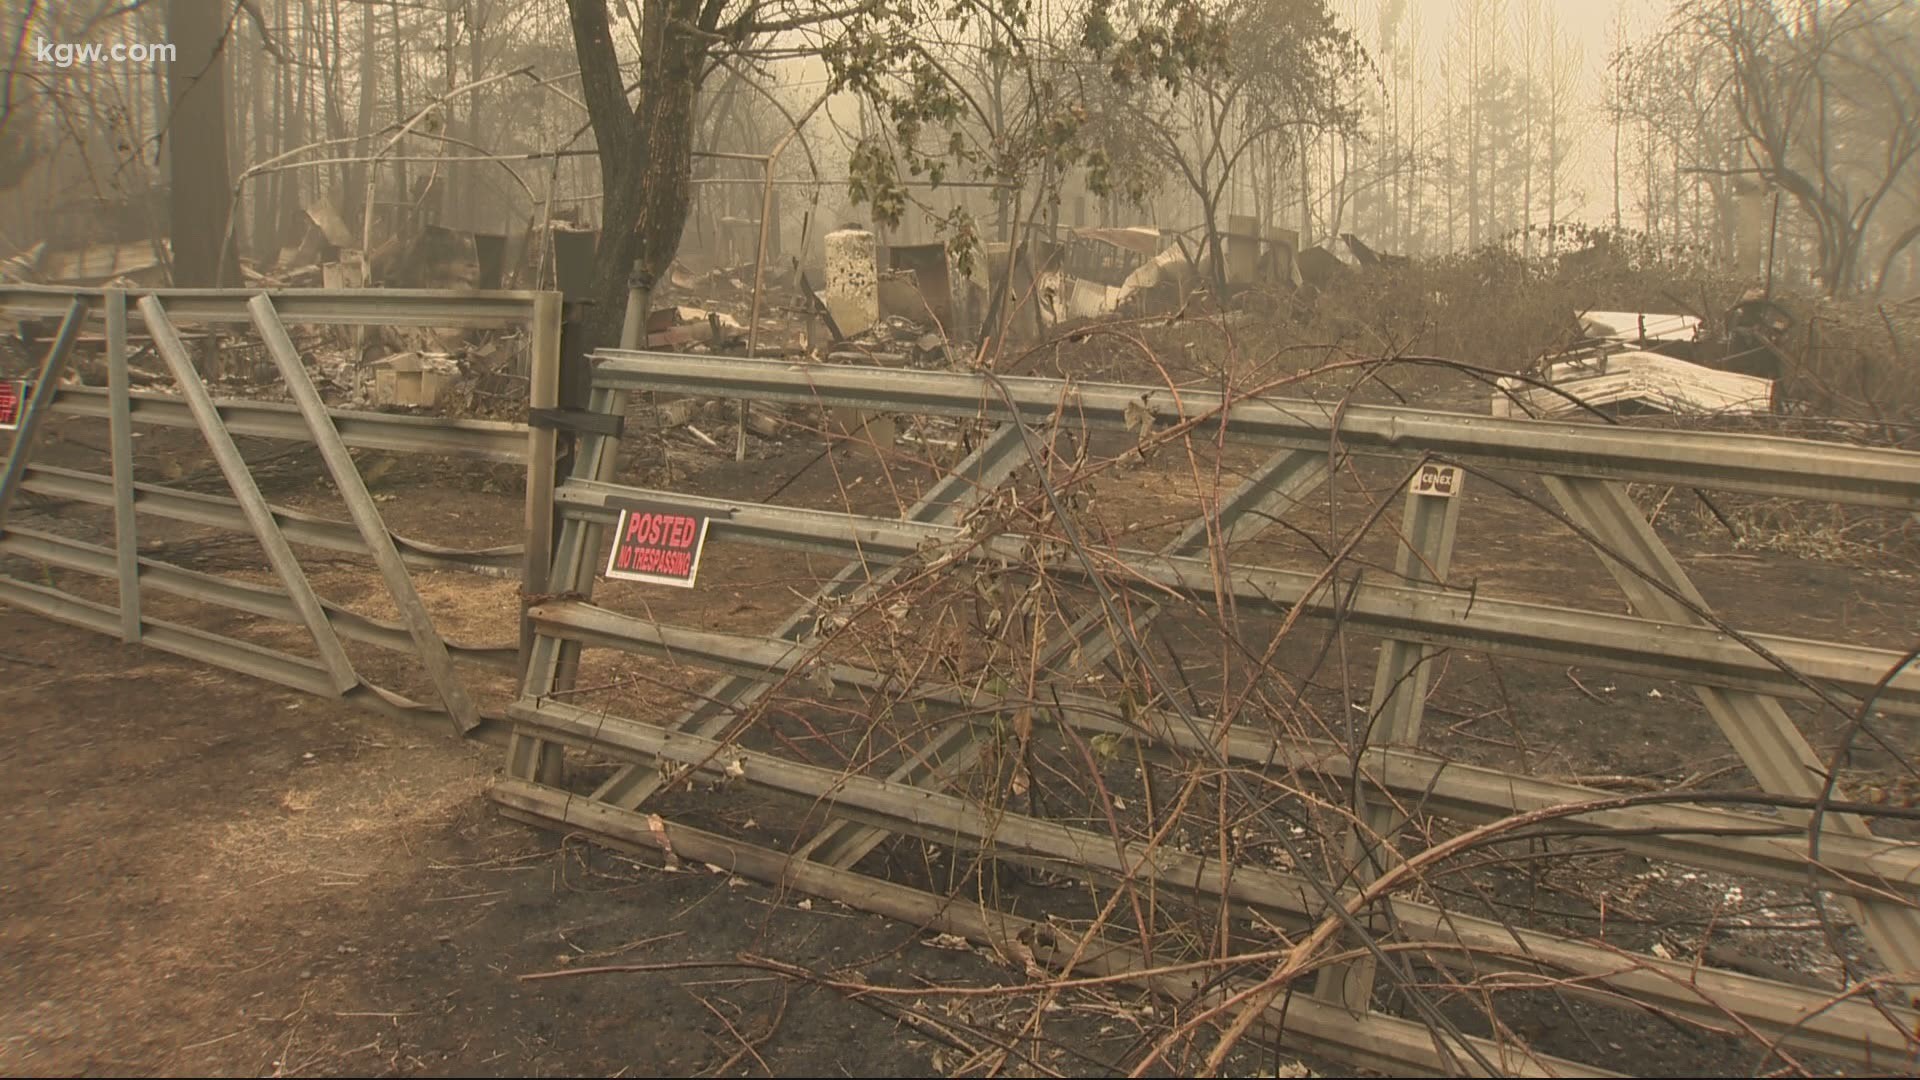 The county saw a 400% increase in 911 calls over two days during wildfire evacuations.